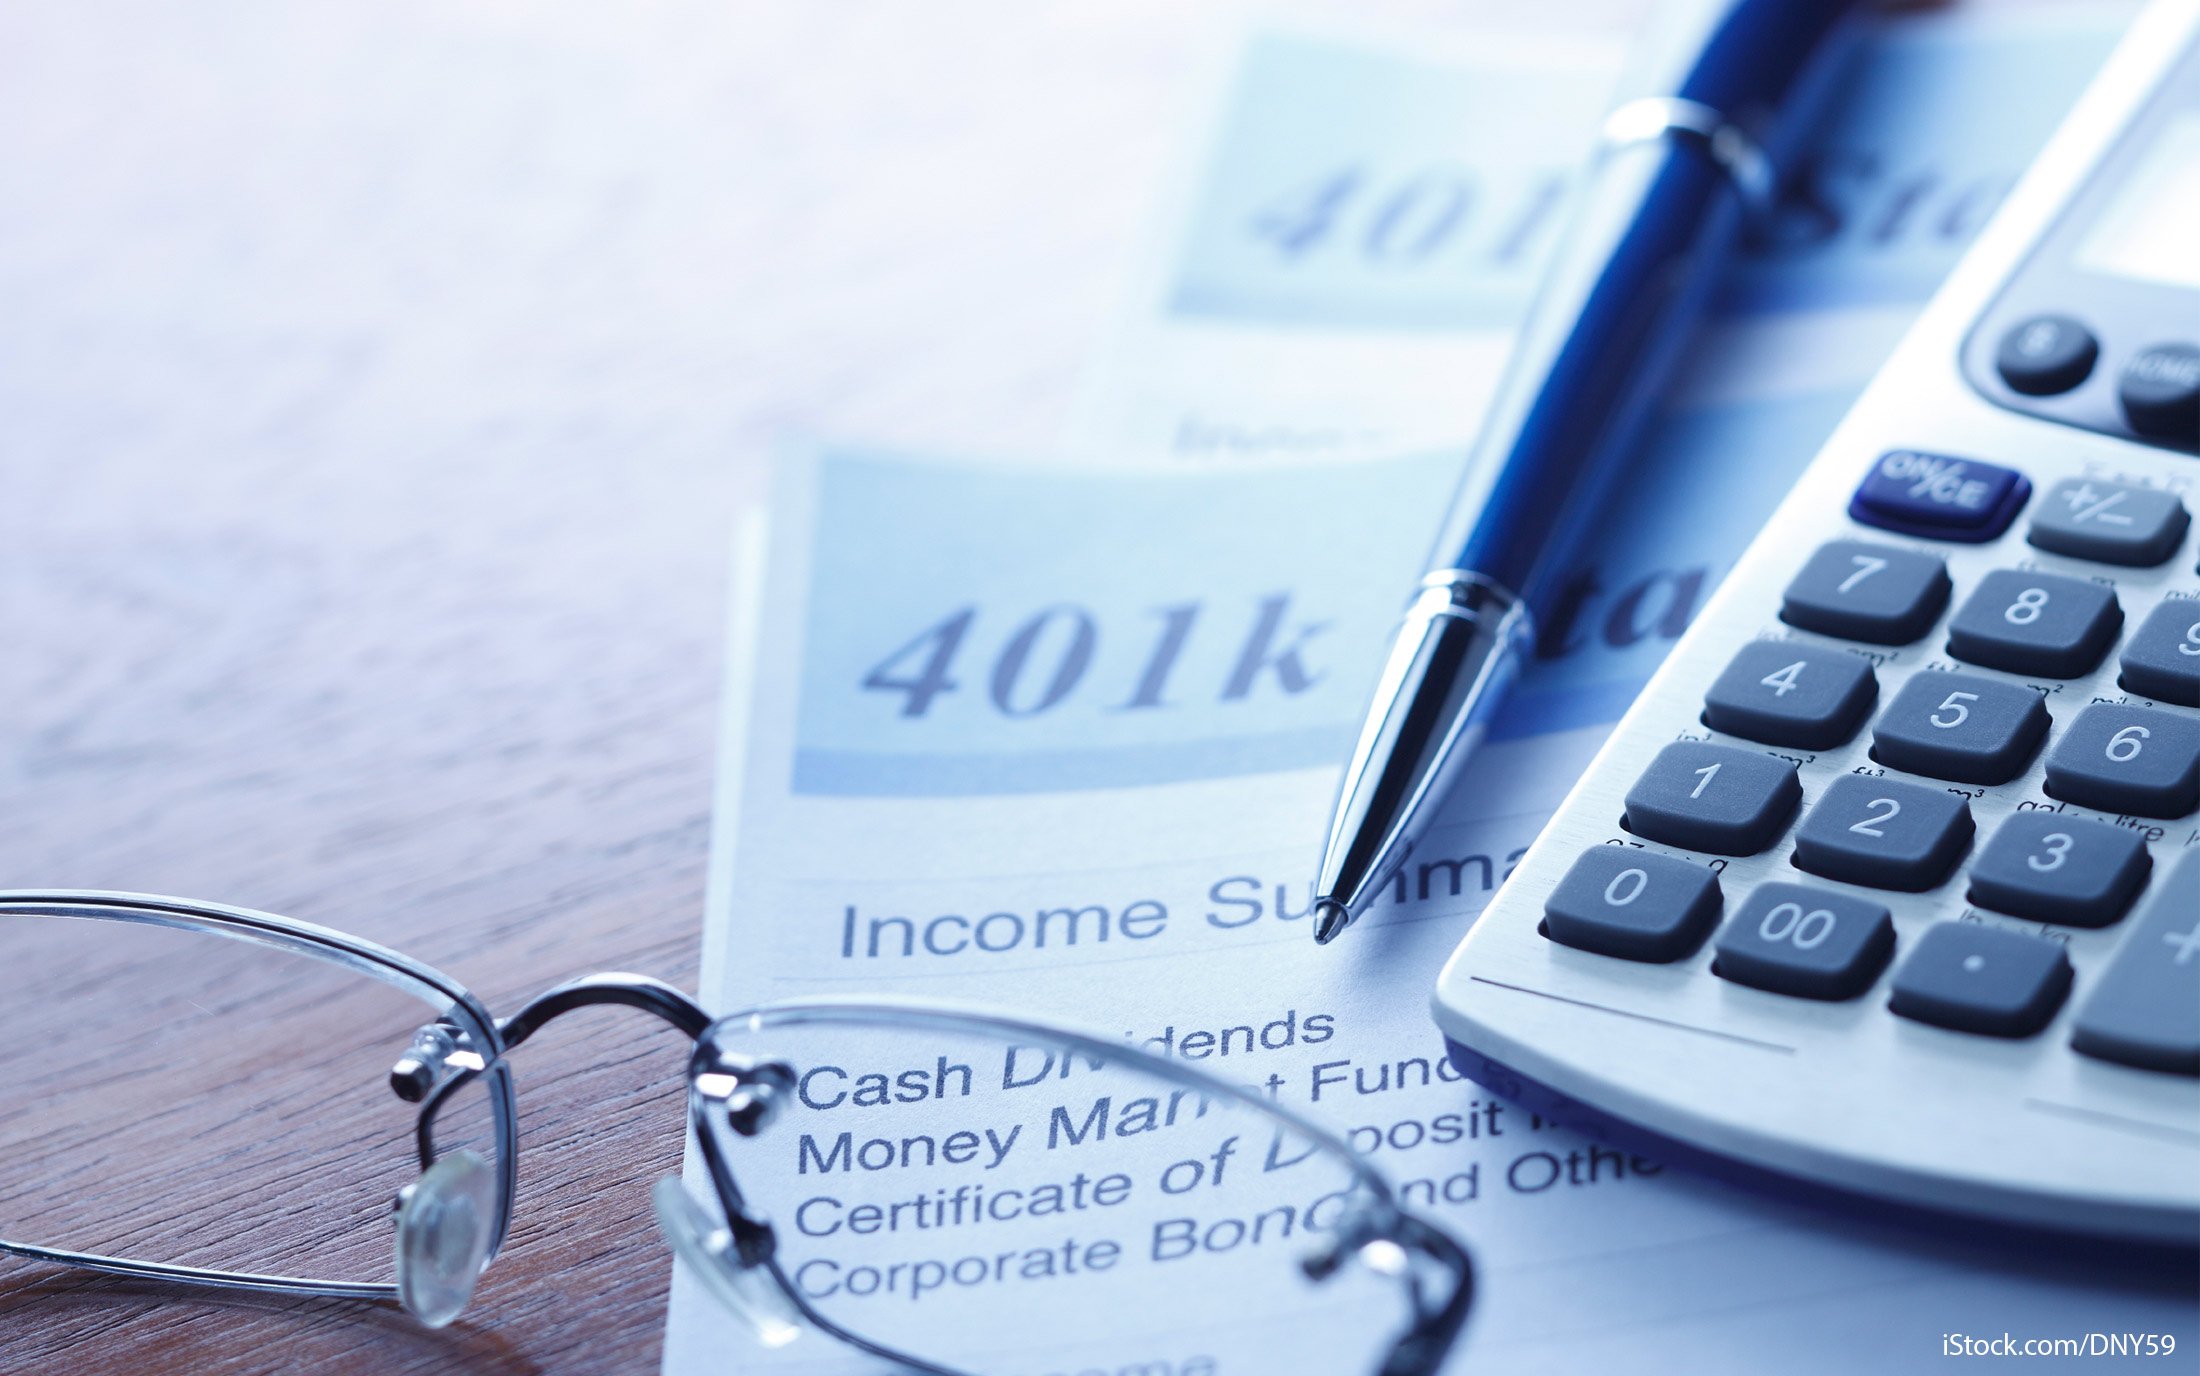 How to Make a 401k Hardship Withdrawal